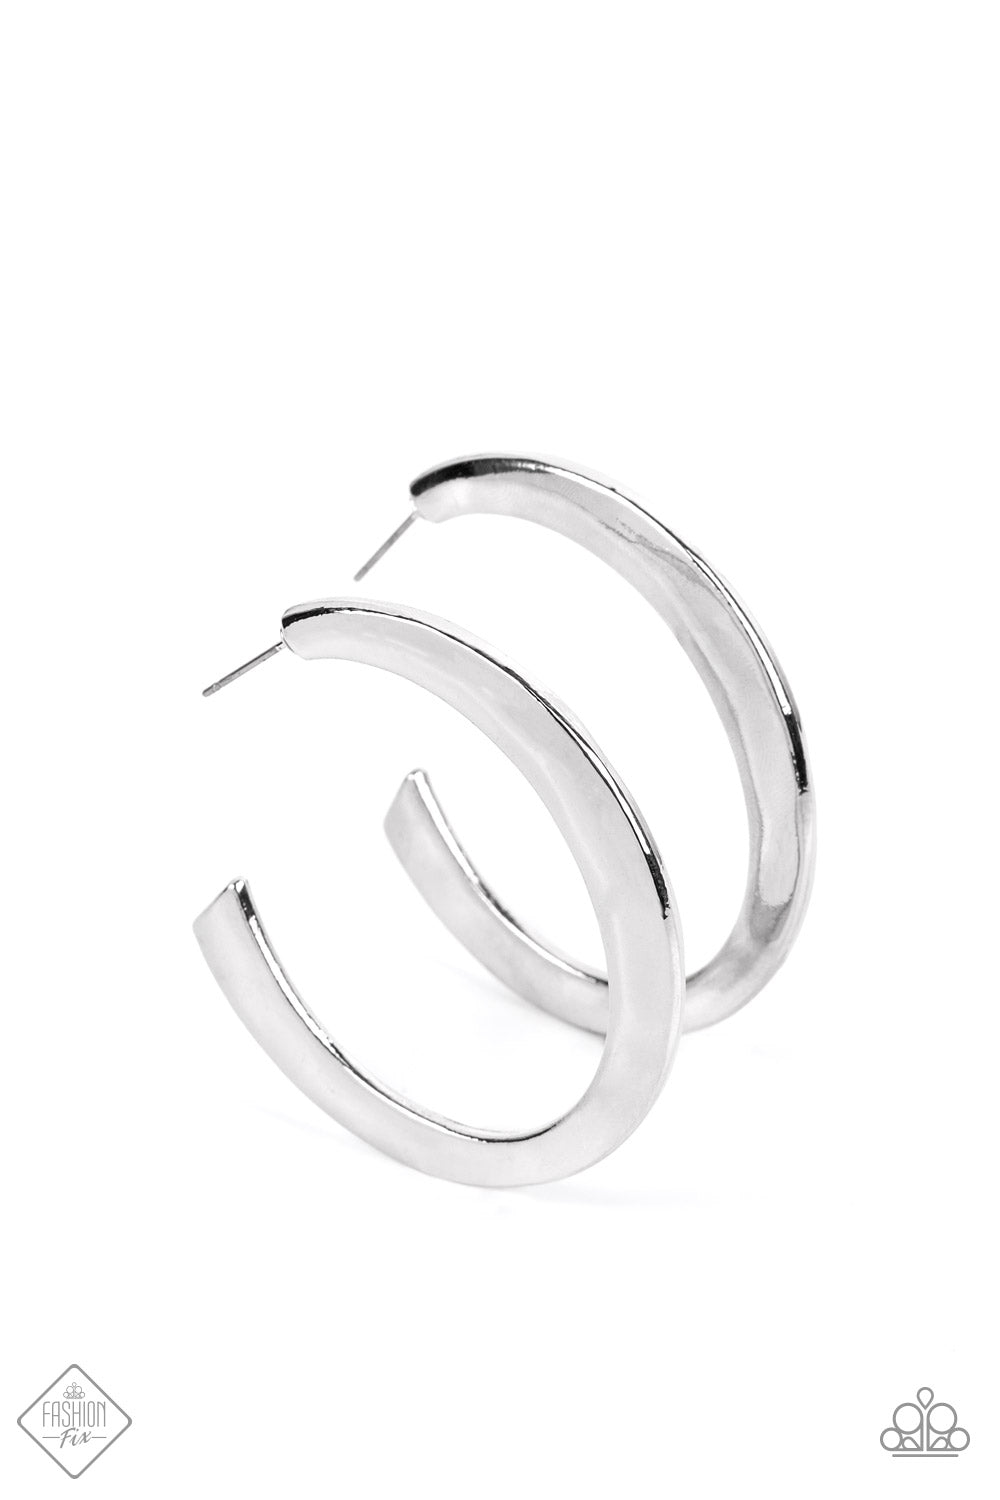 Learning Curve - Silver Hoop Fashion Earrings - Paparazzi Accessories - A thick, flat silver bar curls dramatically into a bold hoop. The surface of the hoop is hammered in subtle texture, adding a touch of handcrafted detail to the simple design. Earring attaches to a standard post fitting. Hoop measures approximately 1 3/4"" in diameter. Sold as one pair of hoop earrings.